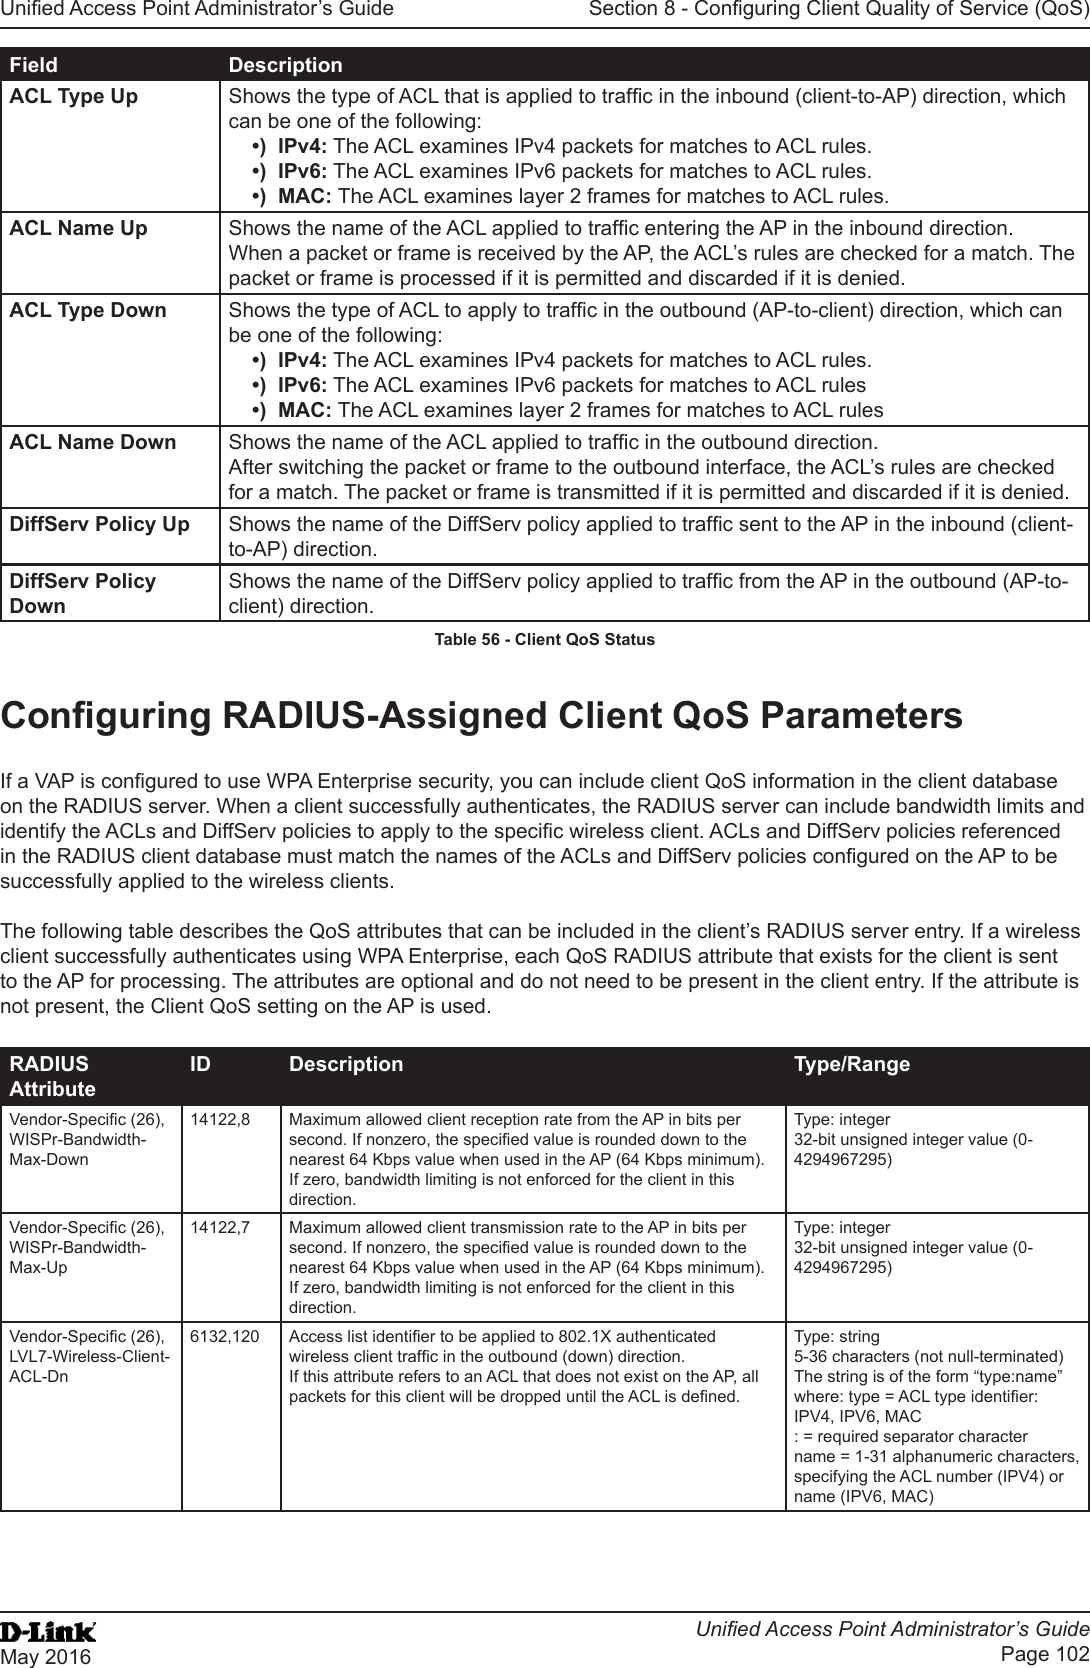 Unied Access Point Administrator’s GuideUnied Access Point Administrator’s GuidePage 102May 2016Section 8 - Conguring Client Quality of Service (QoS)Field DescriptionACL Type Up Shows the type of ACL that is applied to trafc in the inbound (client-to-AP) direction, which can be one of the following: •)  IPv4: The ACL examines IPv4 packets for matches to ACL rules.•)  IPv6: The ACL examines IPv6 packets for matches to ACL rules.•)  MAC: The ACL examines layer 2 frames for matches to ACL rules.ACL Name Up Shows the name of the ACL applied to trafc entering the AP in the inbound direction. When a packet or frame is received by the AP, the ACL’s rules are checked for a match. The packet or frame is processed if it is permitted and discarded if it is denied.ACL Type Down Shows the type of ACL to apply to trafc in the outbound (AP-to-client) direction, which can be one of the following: •)  IPv4: The ACL examines IPv4 packets for matches to ACL rules.•)  IPv6: The ACL examines IPv6 packets for matches to ACL rules•)  MAC: The ACL examines layer 2 frames for matches to ACL rulesACL Name Down Shows the name of the ACL applied to trafc in the outbound direction. After switching the packet or frame to the outbound interface, the ACL’s rules are checked for a match. The packet or frame is transmitted if it is permitted and discarded if it is denied.DiffServ Policy Up Shows the name of the DiffServ policy applied to trafc sent to the AP in the inbound (client-to-AP) direction.DiffServ Policy DownShows the name of the DiffServ policy applied to trafc from the AP in the outbound (AP-to-client) direction.Table 56 - Client QoS StatusConguring RADIUS-Assigned Client QoS ParametersIf a VAP is congured to use WPA Enterprise security, you can include client QoS information in the client database on the RADIUS server. When a client successfully authenticates, the RADIUS server can include bandwidth limits and identify the ACLs and DiffServ policies to apply to the specic wireless client. ACLs and DiffServ policies referenced in the RADIUS client database must match the names of the ACLs and DiffServ policies congured on the AP to be successfully applied to the wireless clients.The following table describes the QoS attributes that can be included in the client’s RADIUS server entry. If a wireless client successfully authenticates using WPA Enterprise, each QoS RADIUS attribute that exists for the client is sent to the AP for processing. The attributes are optional and do not need to be present in the client entry. If the attribute is not present, the Client QoS setting on the AP is used.RADIUS AttributeID Description Type/RangeVendor-Specic (26), WISPr-Bandwidth-Max-Down14122,8 Maximum allowed client reception rate from the AP in bits per second. If nonzero, the specied value is rounded down to the nearest 64 Kbps value when used in the AP (64 Kbps minimum). If zero, bandwidth limiting is not enforced for the client in this direction.Type: integer32-bit unsigned integer value (0-4294967295)Vendor-Specic (26), WISPr-Bandwidth-Max-Up14122,7 Maximum allowed client transmission rate to the AP in bits per second. If nonzero, the specied value is rounded down to the nearest 64 Kbps value when used in the AP (64 Kbps minimum). If zero, bandwidth limiting is not enforced for the client in this direction.Type: integer32-bit unsigned integer value (0-4294967295)Vendor-Specic (26), LVL7-Wireless-Client-ACL-Dn6132,120 Access list identier to be applied to 802.1X authenticated wireless client trafc in the outbound (down) direction.If this attribute refers to an ACL that does not exist on the AP, all packets for this client will be dropped until the ACL is dened.Type: string5-36 characters (not null-terminated)The string is of the form “type:name” where: type = ACL type identier: IPV4, IPV6, MAC: = required separator charactername = 1-31 alphanumeric characters, specifying the ACL number (IPV4) or name (IPV6, MAC)